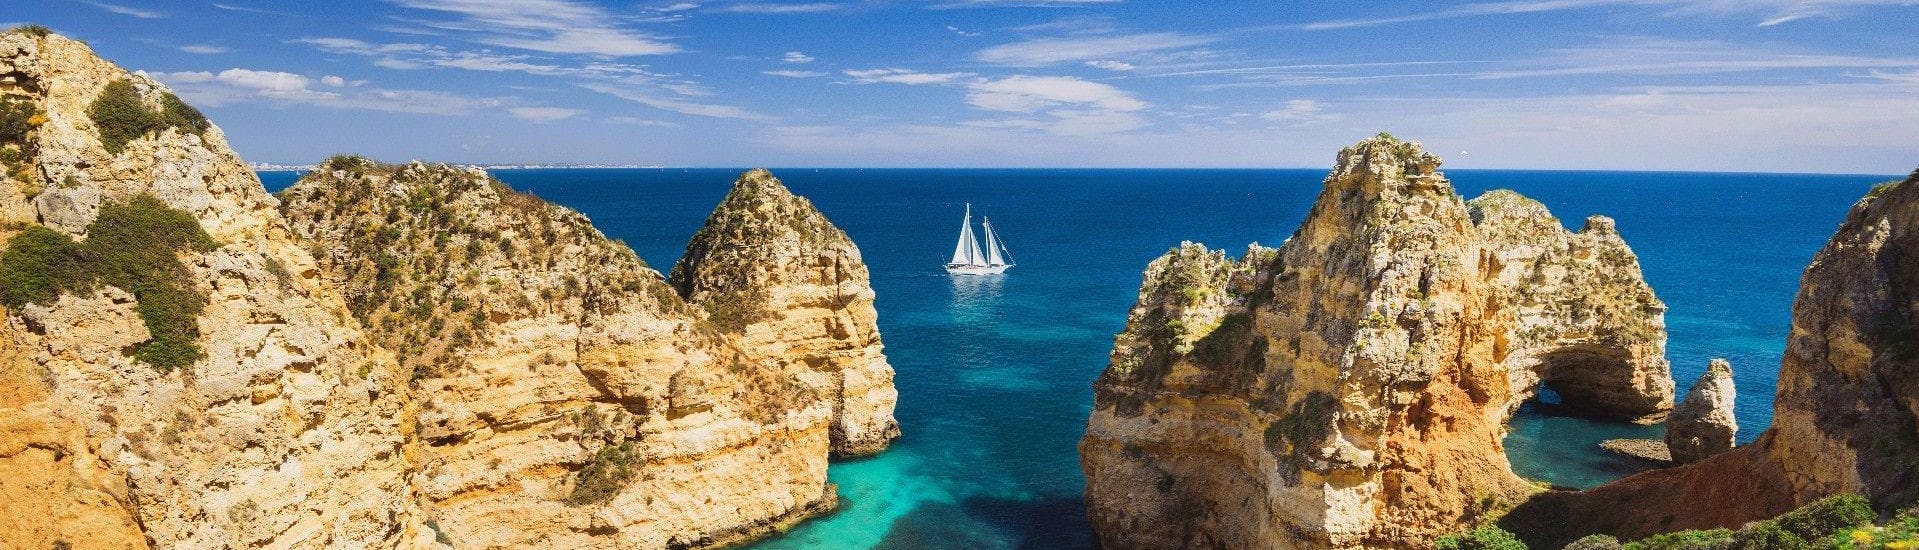 An image of the stunning rock formations of the Algarve coastline that can be viewed on a boat trip from Vilamoura.